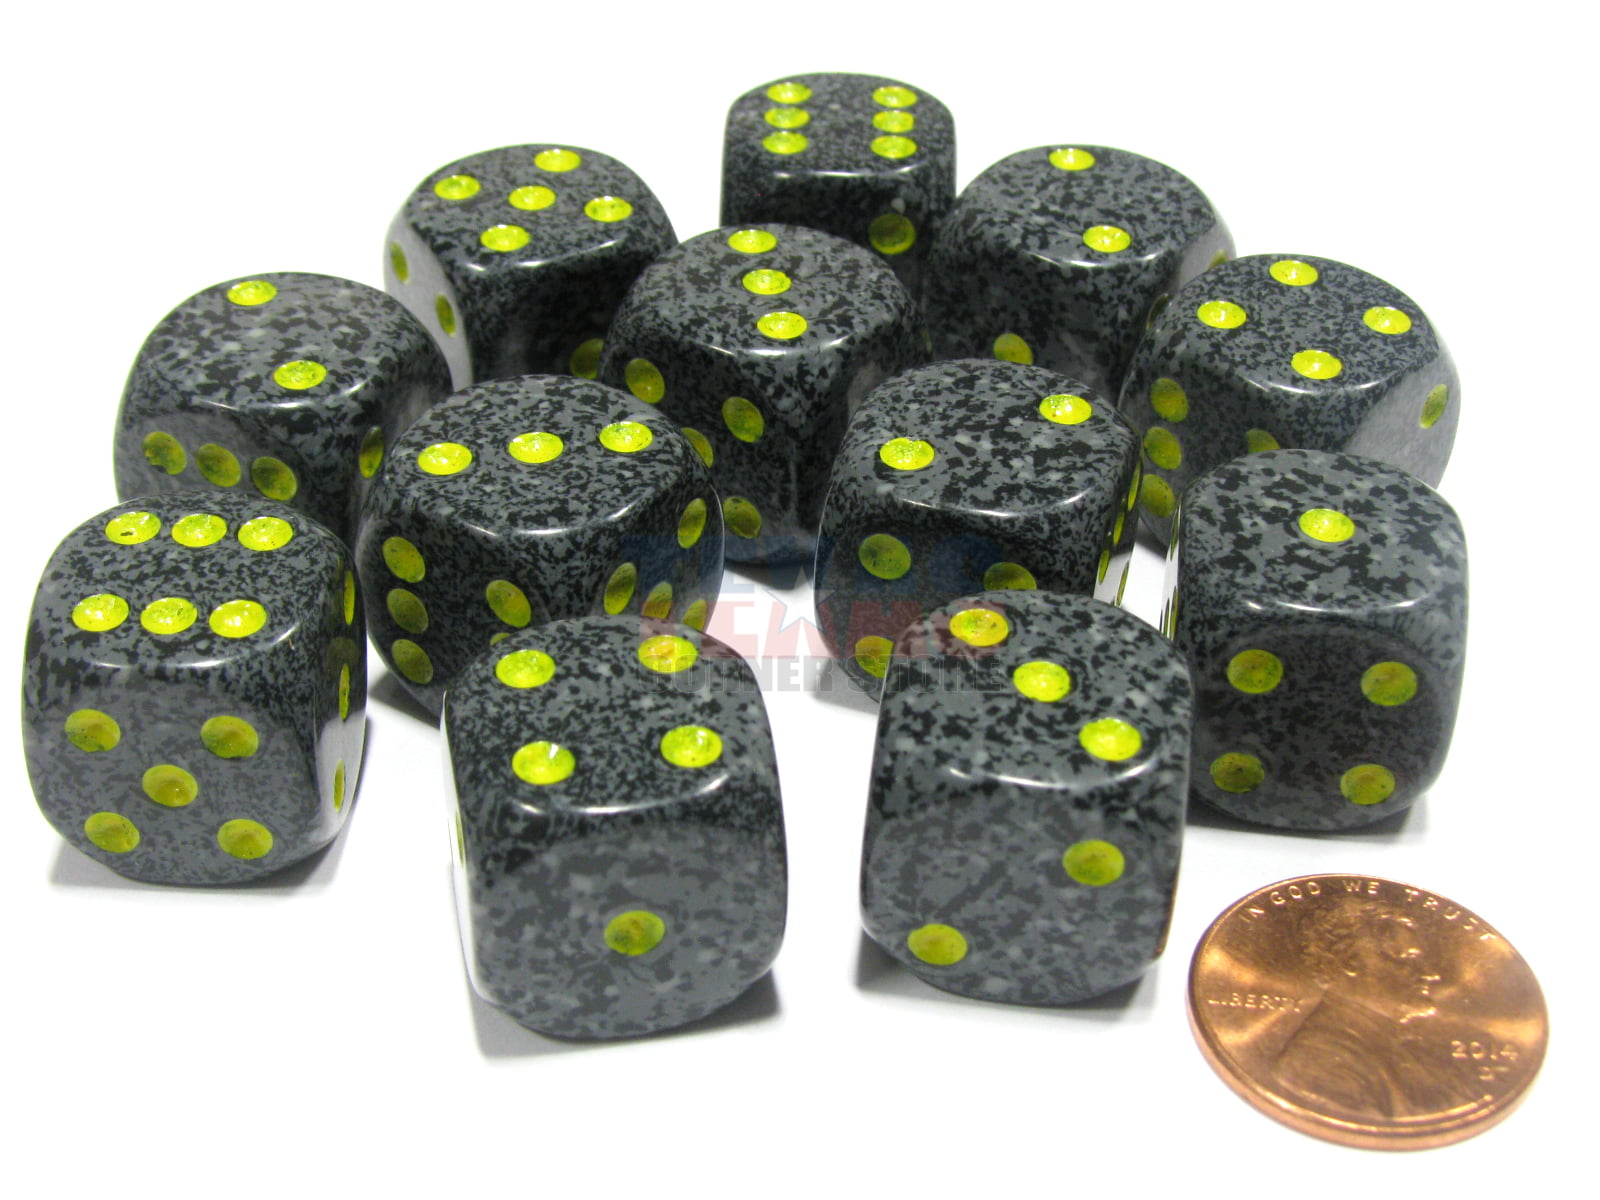 CHESSEX URBAN CAMO SPECKLED 16MM SIX SIDED DIE 12 BLOCK OF DICE 